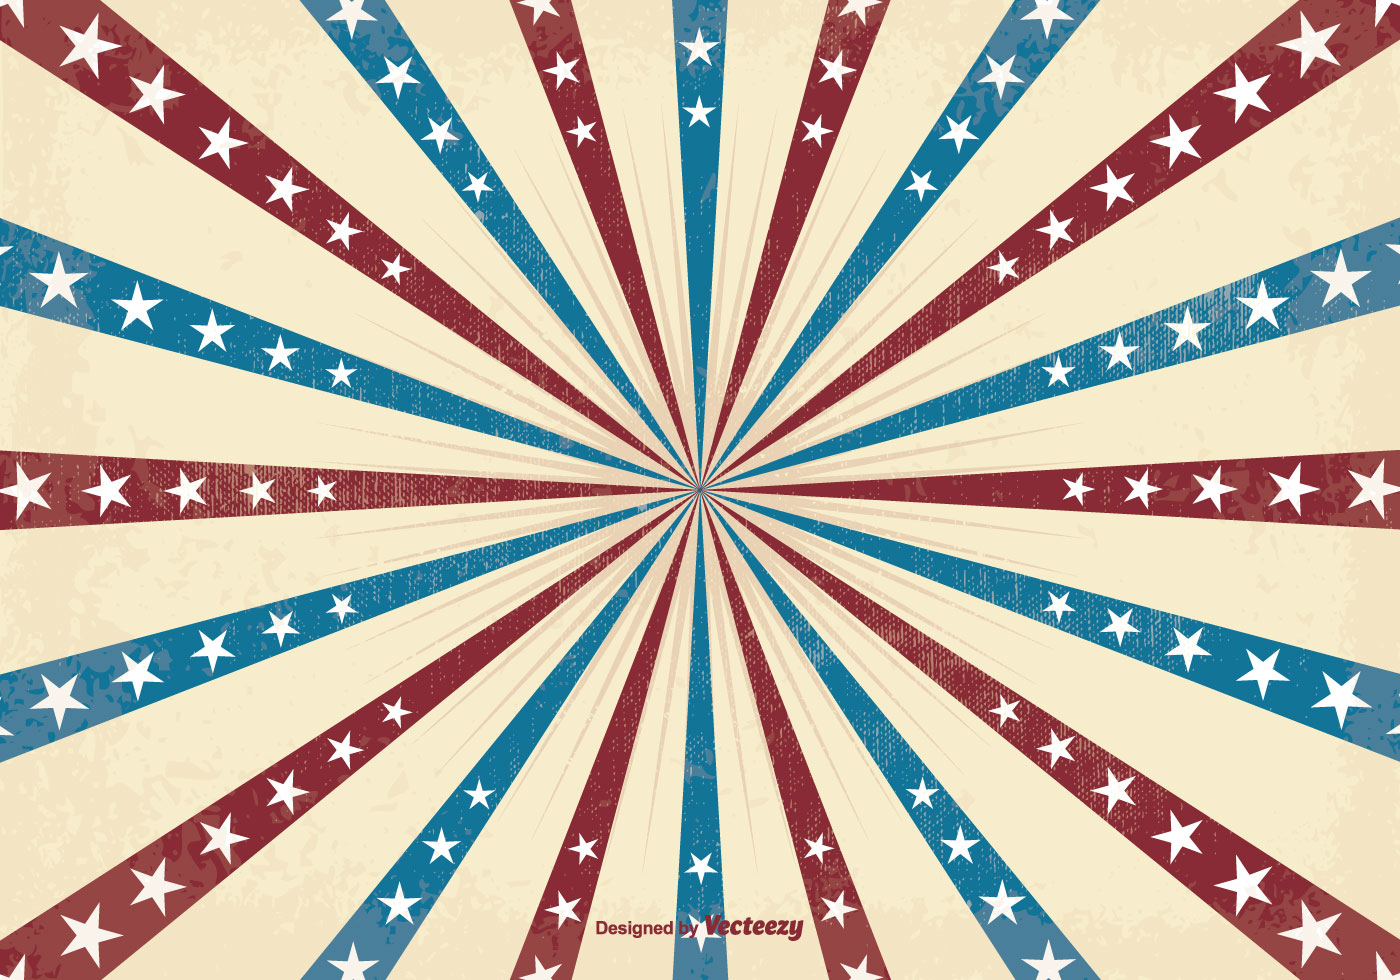 Here is an awesome retro patriotic style vector background that I really ho...